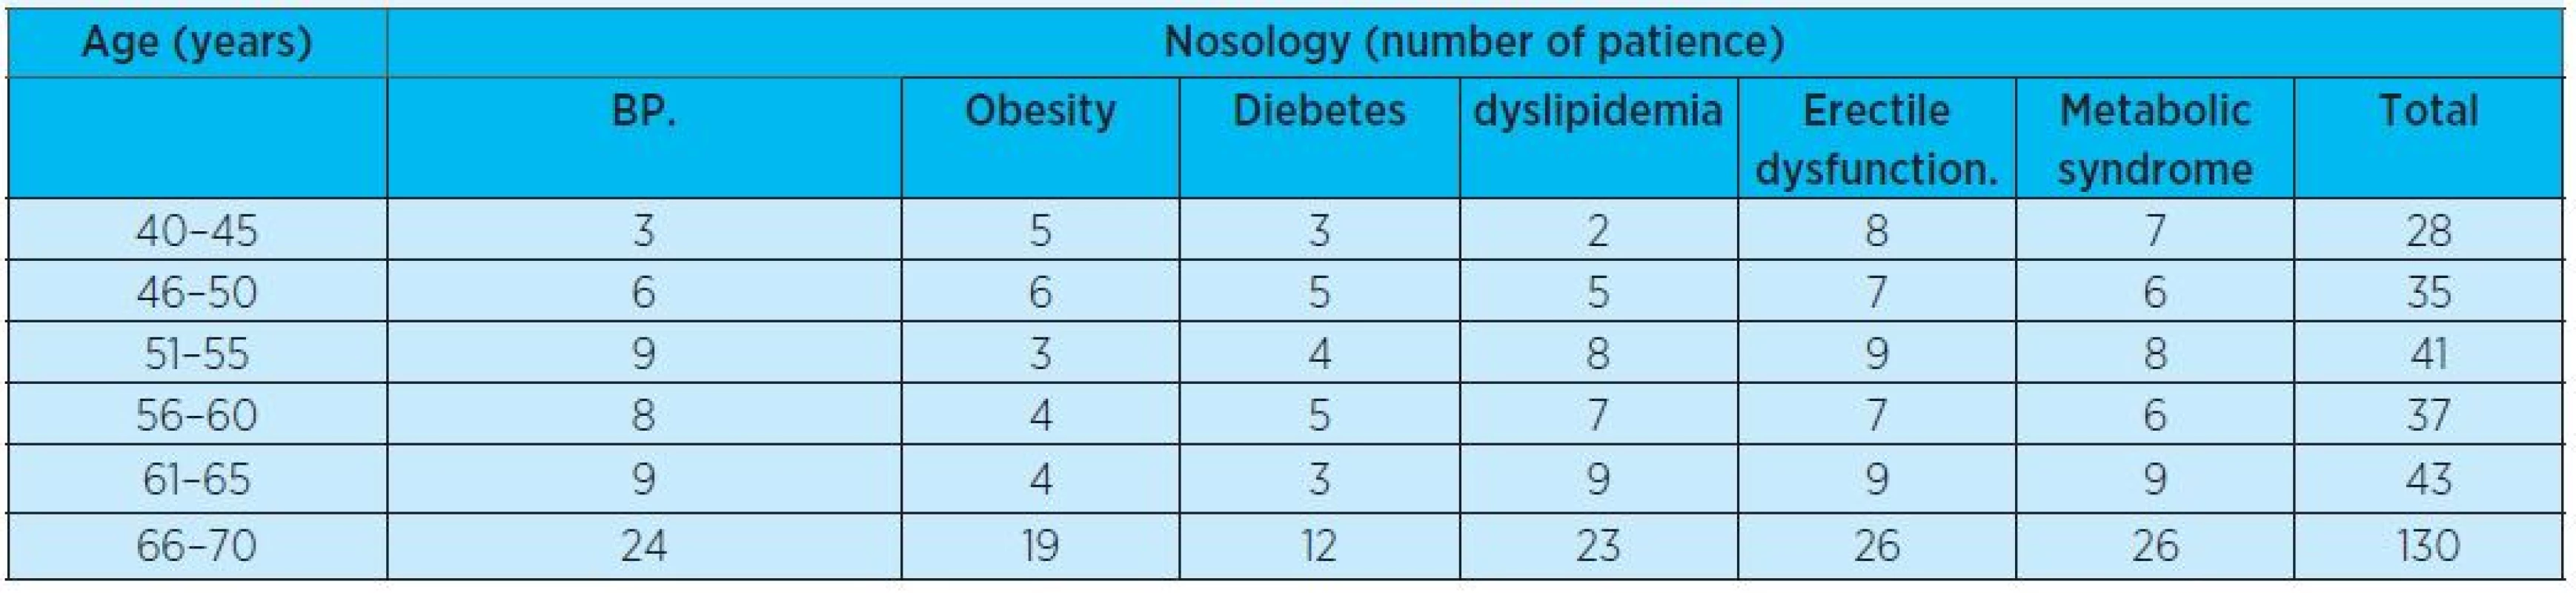 Age and nosological characteristics of patients used in this study